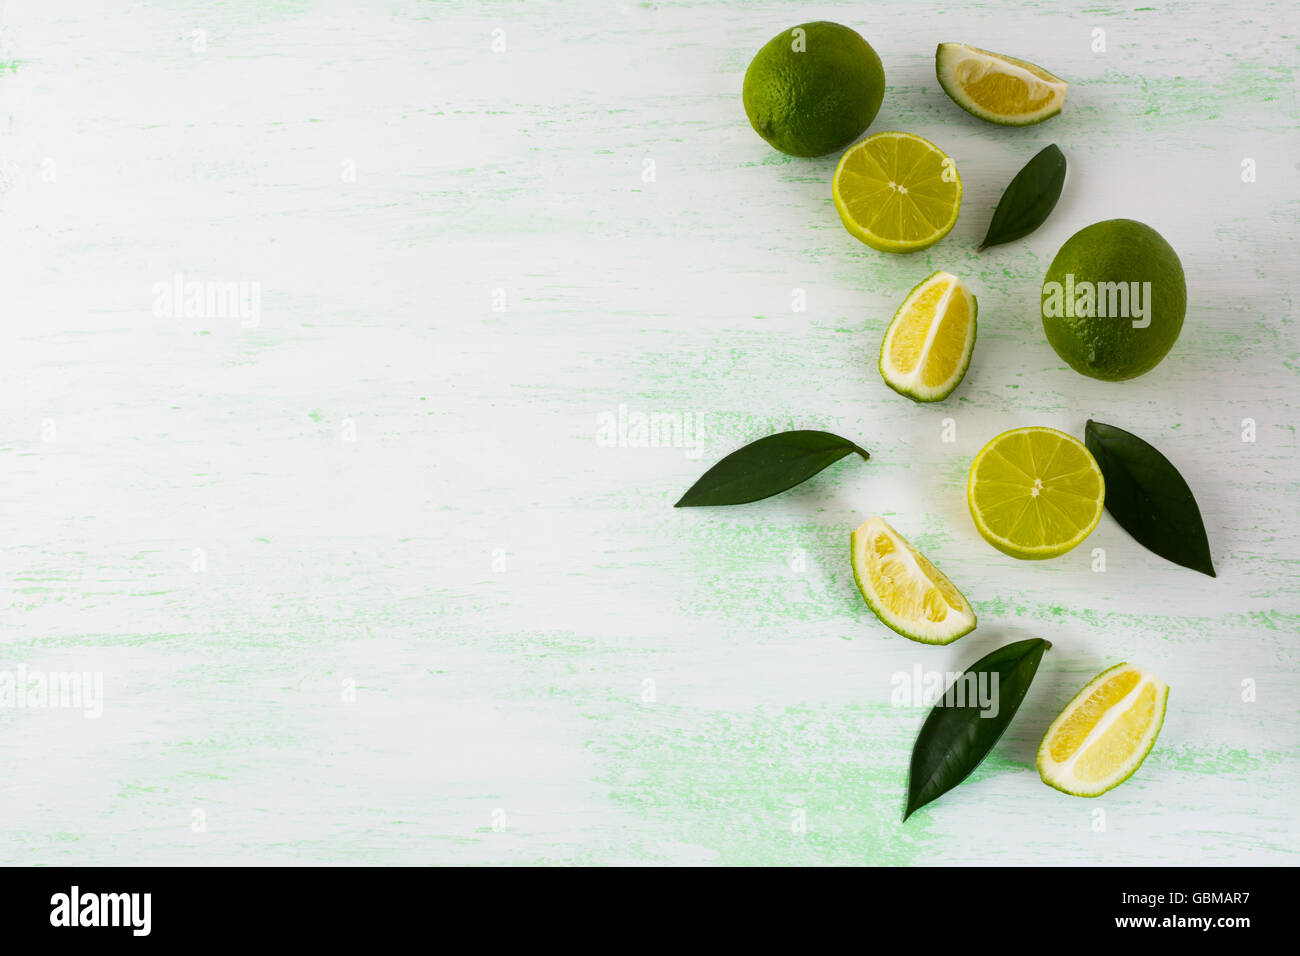 Healthy eating concept with limes and lemons. Fresh food. Vegetarian food. Fresh fruit. Mixed fruit. Fruit background. Stock Photo